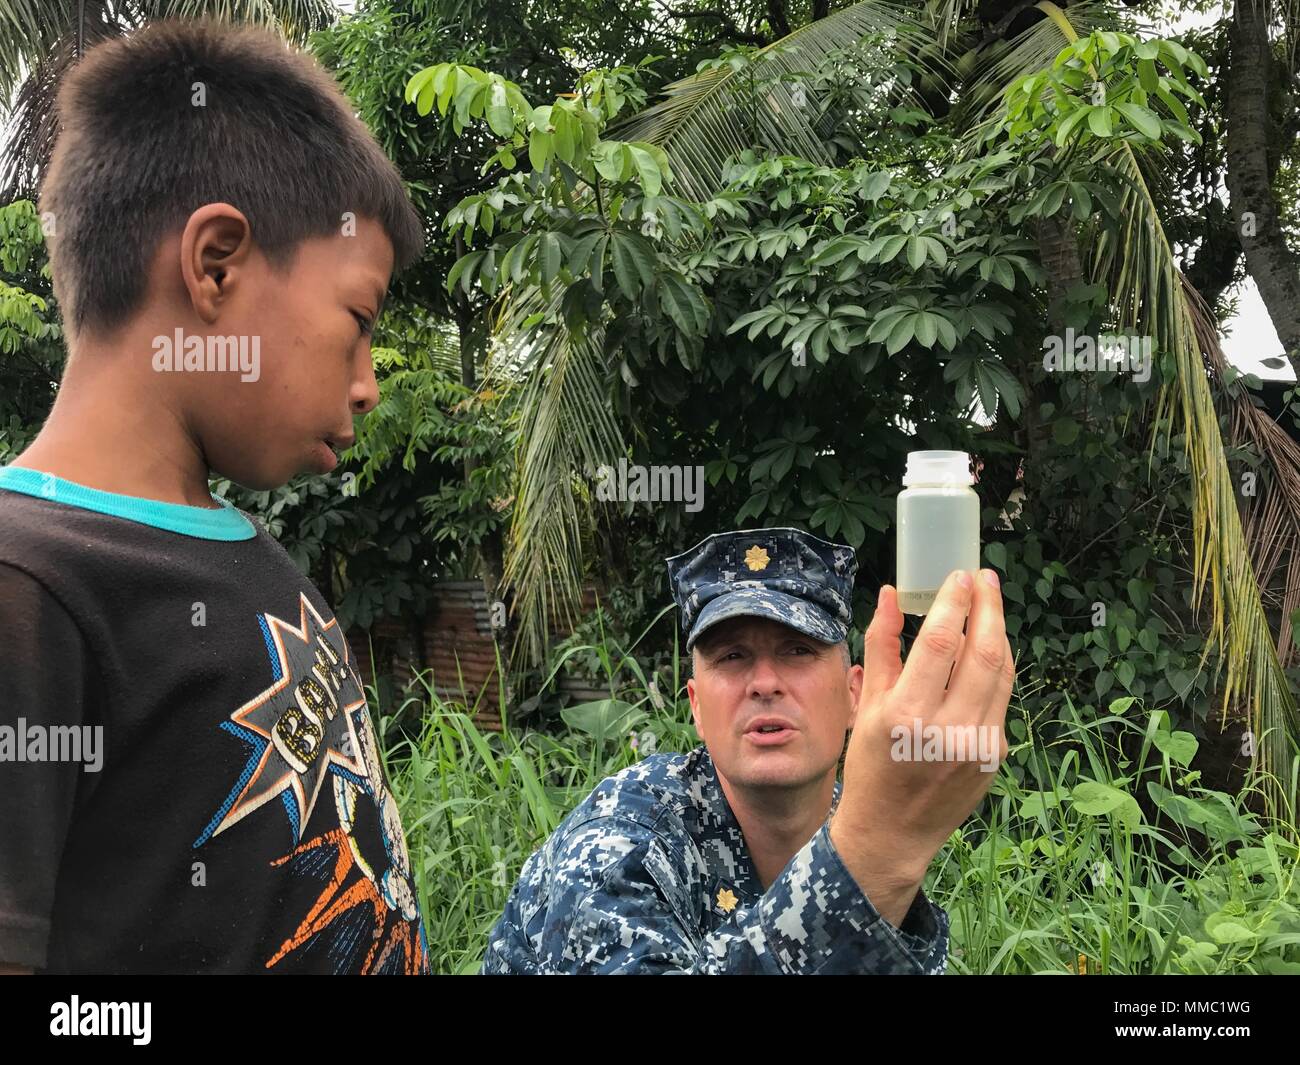 171006-A-QE286-0022 PUERTO BARRIOS, Guatemala (Oct. 6, 2017) Lt. Cmdr. Ian Sutherland, technical director for Navy Entomology Center of Excellence, shows a child mosquito larvae at Clinico Salud Del Puerto Barrios, a local health clinic, during Southern Partnership Station 17 (SPS 17). SPS 17 is a U.S. Navy deployment executed by U.S. Naval Forces Southern Command/U.S. 4th Fleet, focused on subject matter expert exchanges with partner nation militaries and security forces in Central and South America. (U.S. Army photo by SPC Judge Jones/Released) Stock Photo